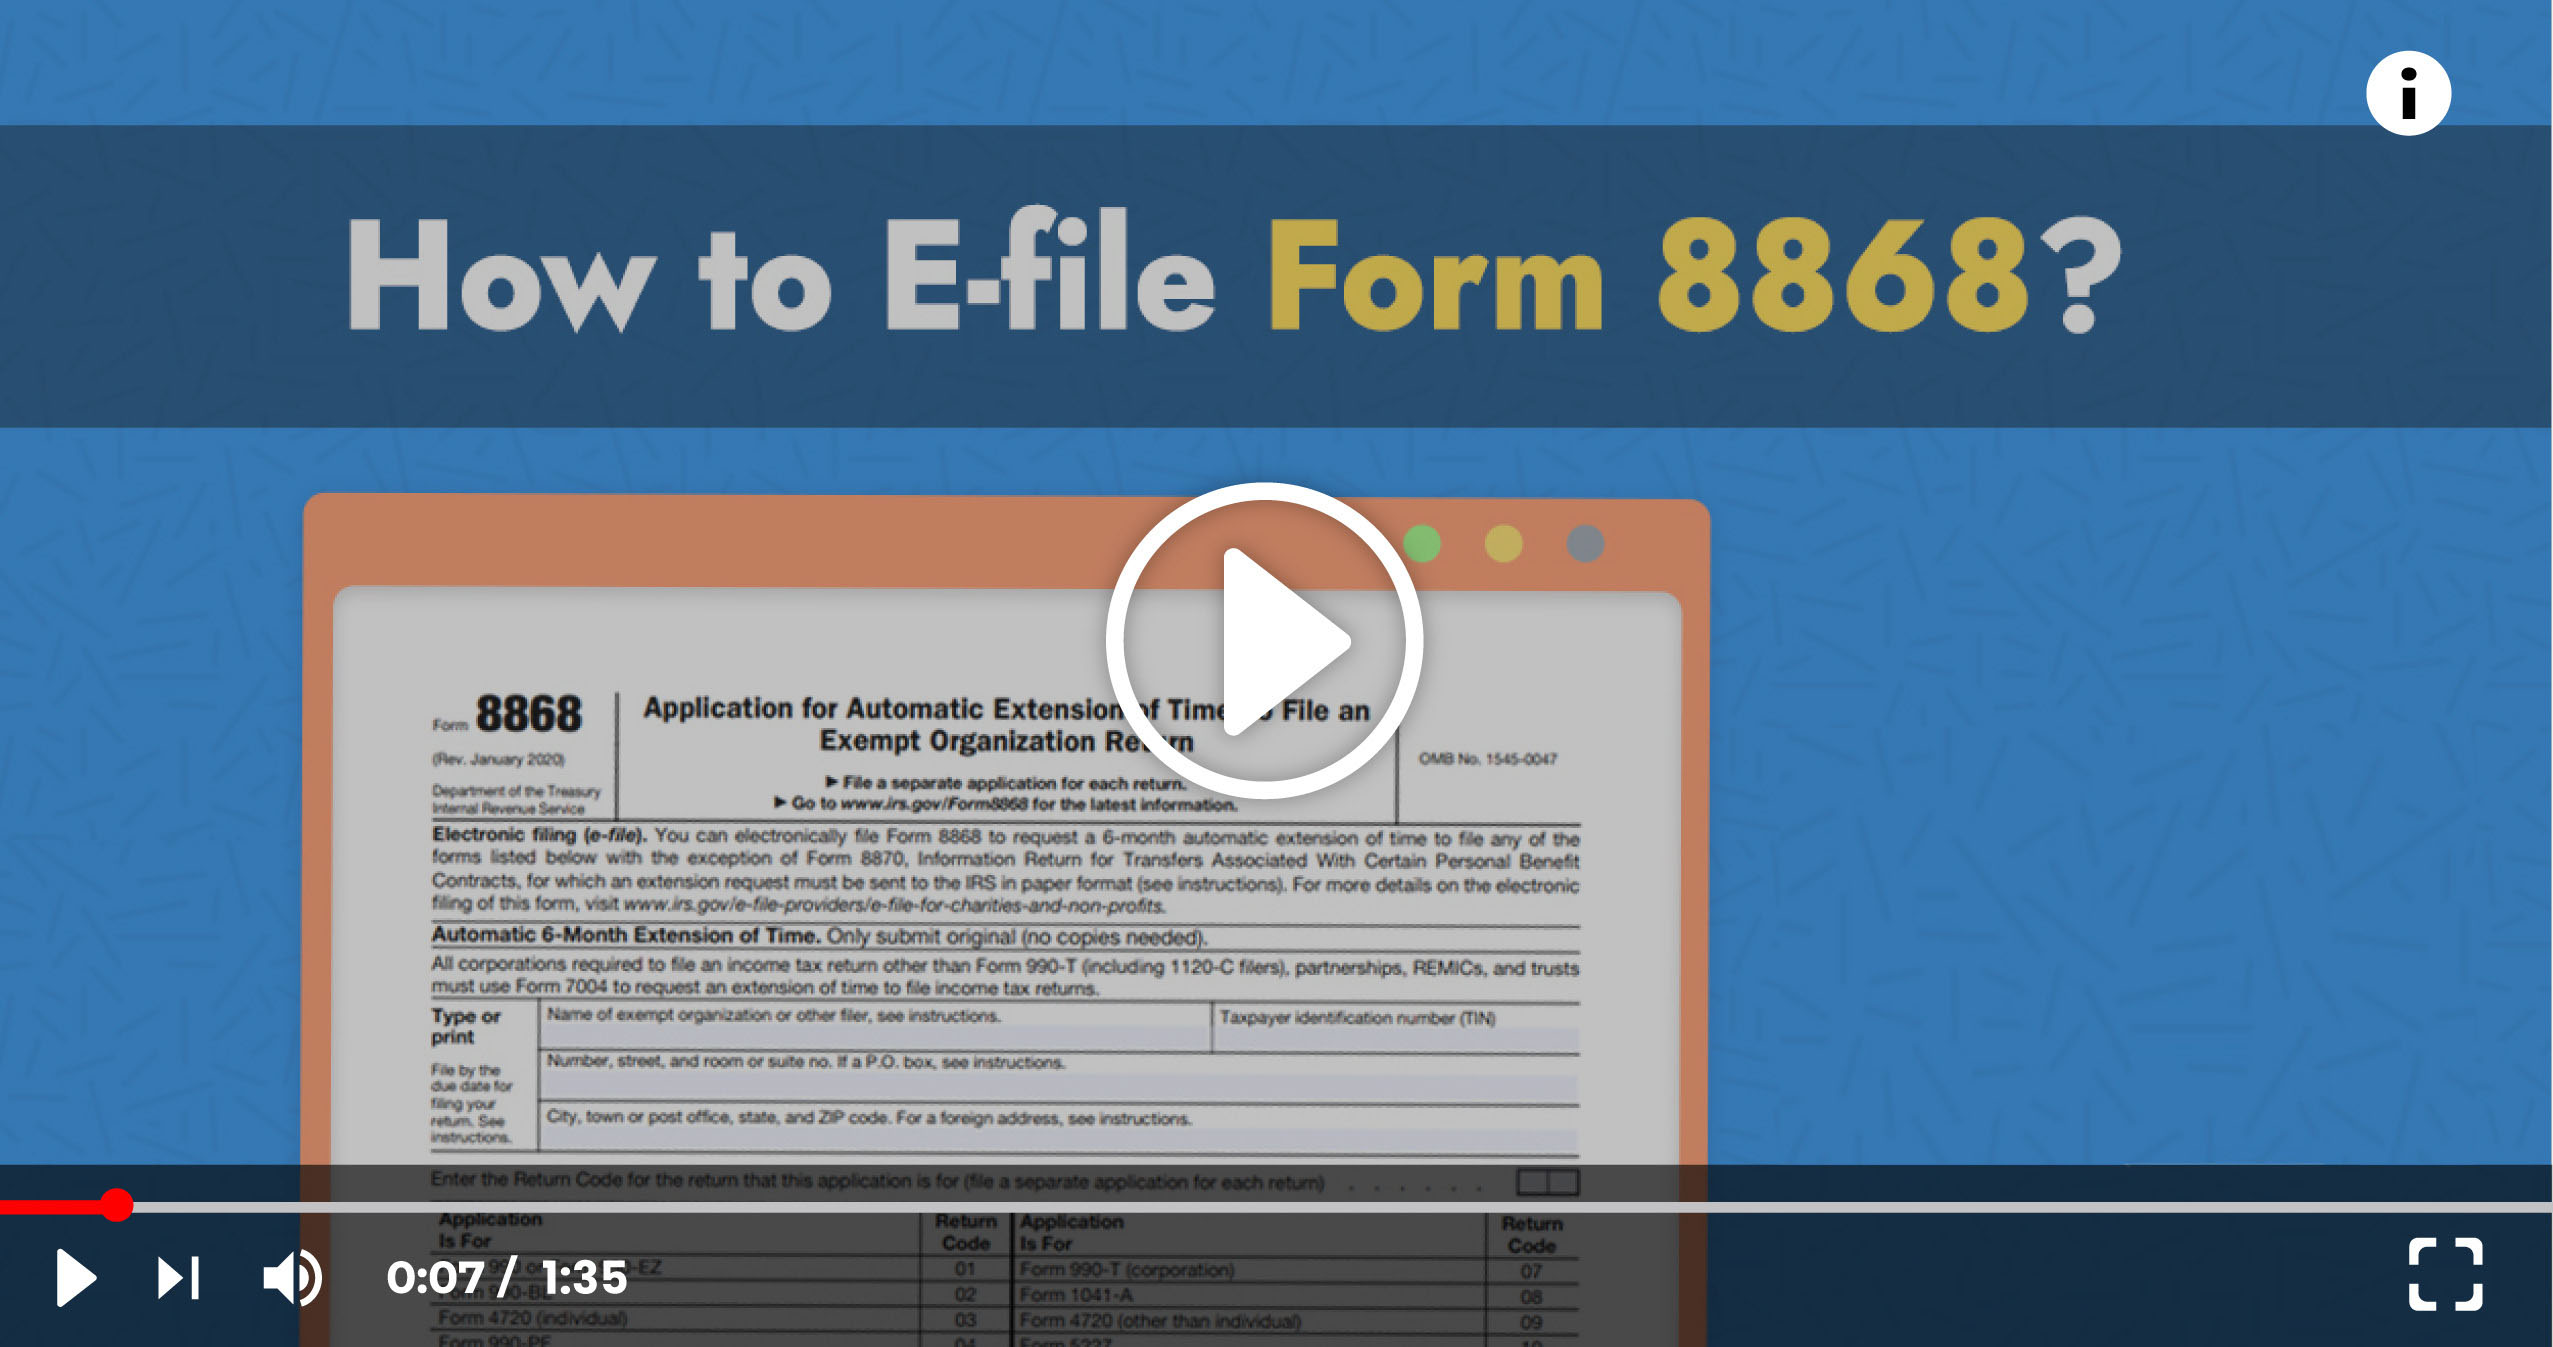 file-form-8868-online-e-file-990-extension-with-the-irs